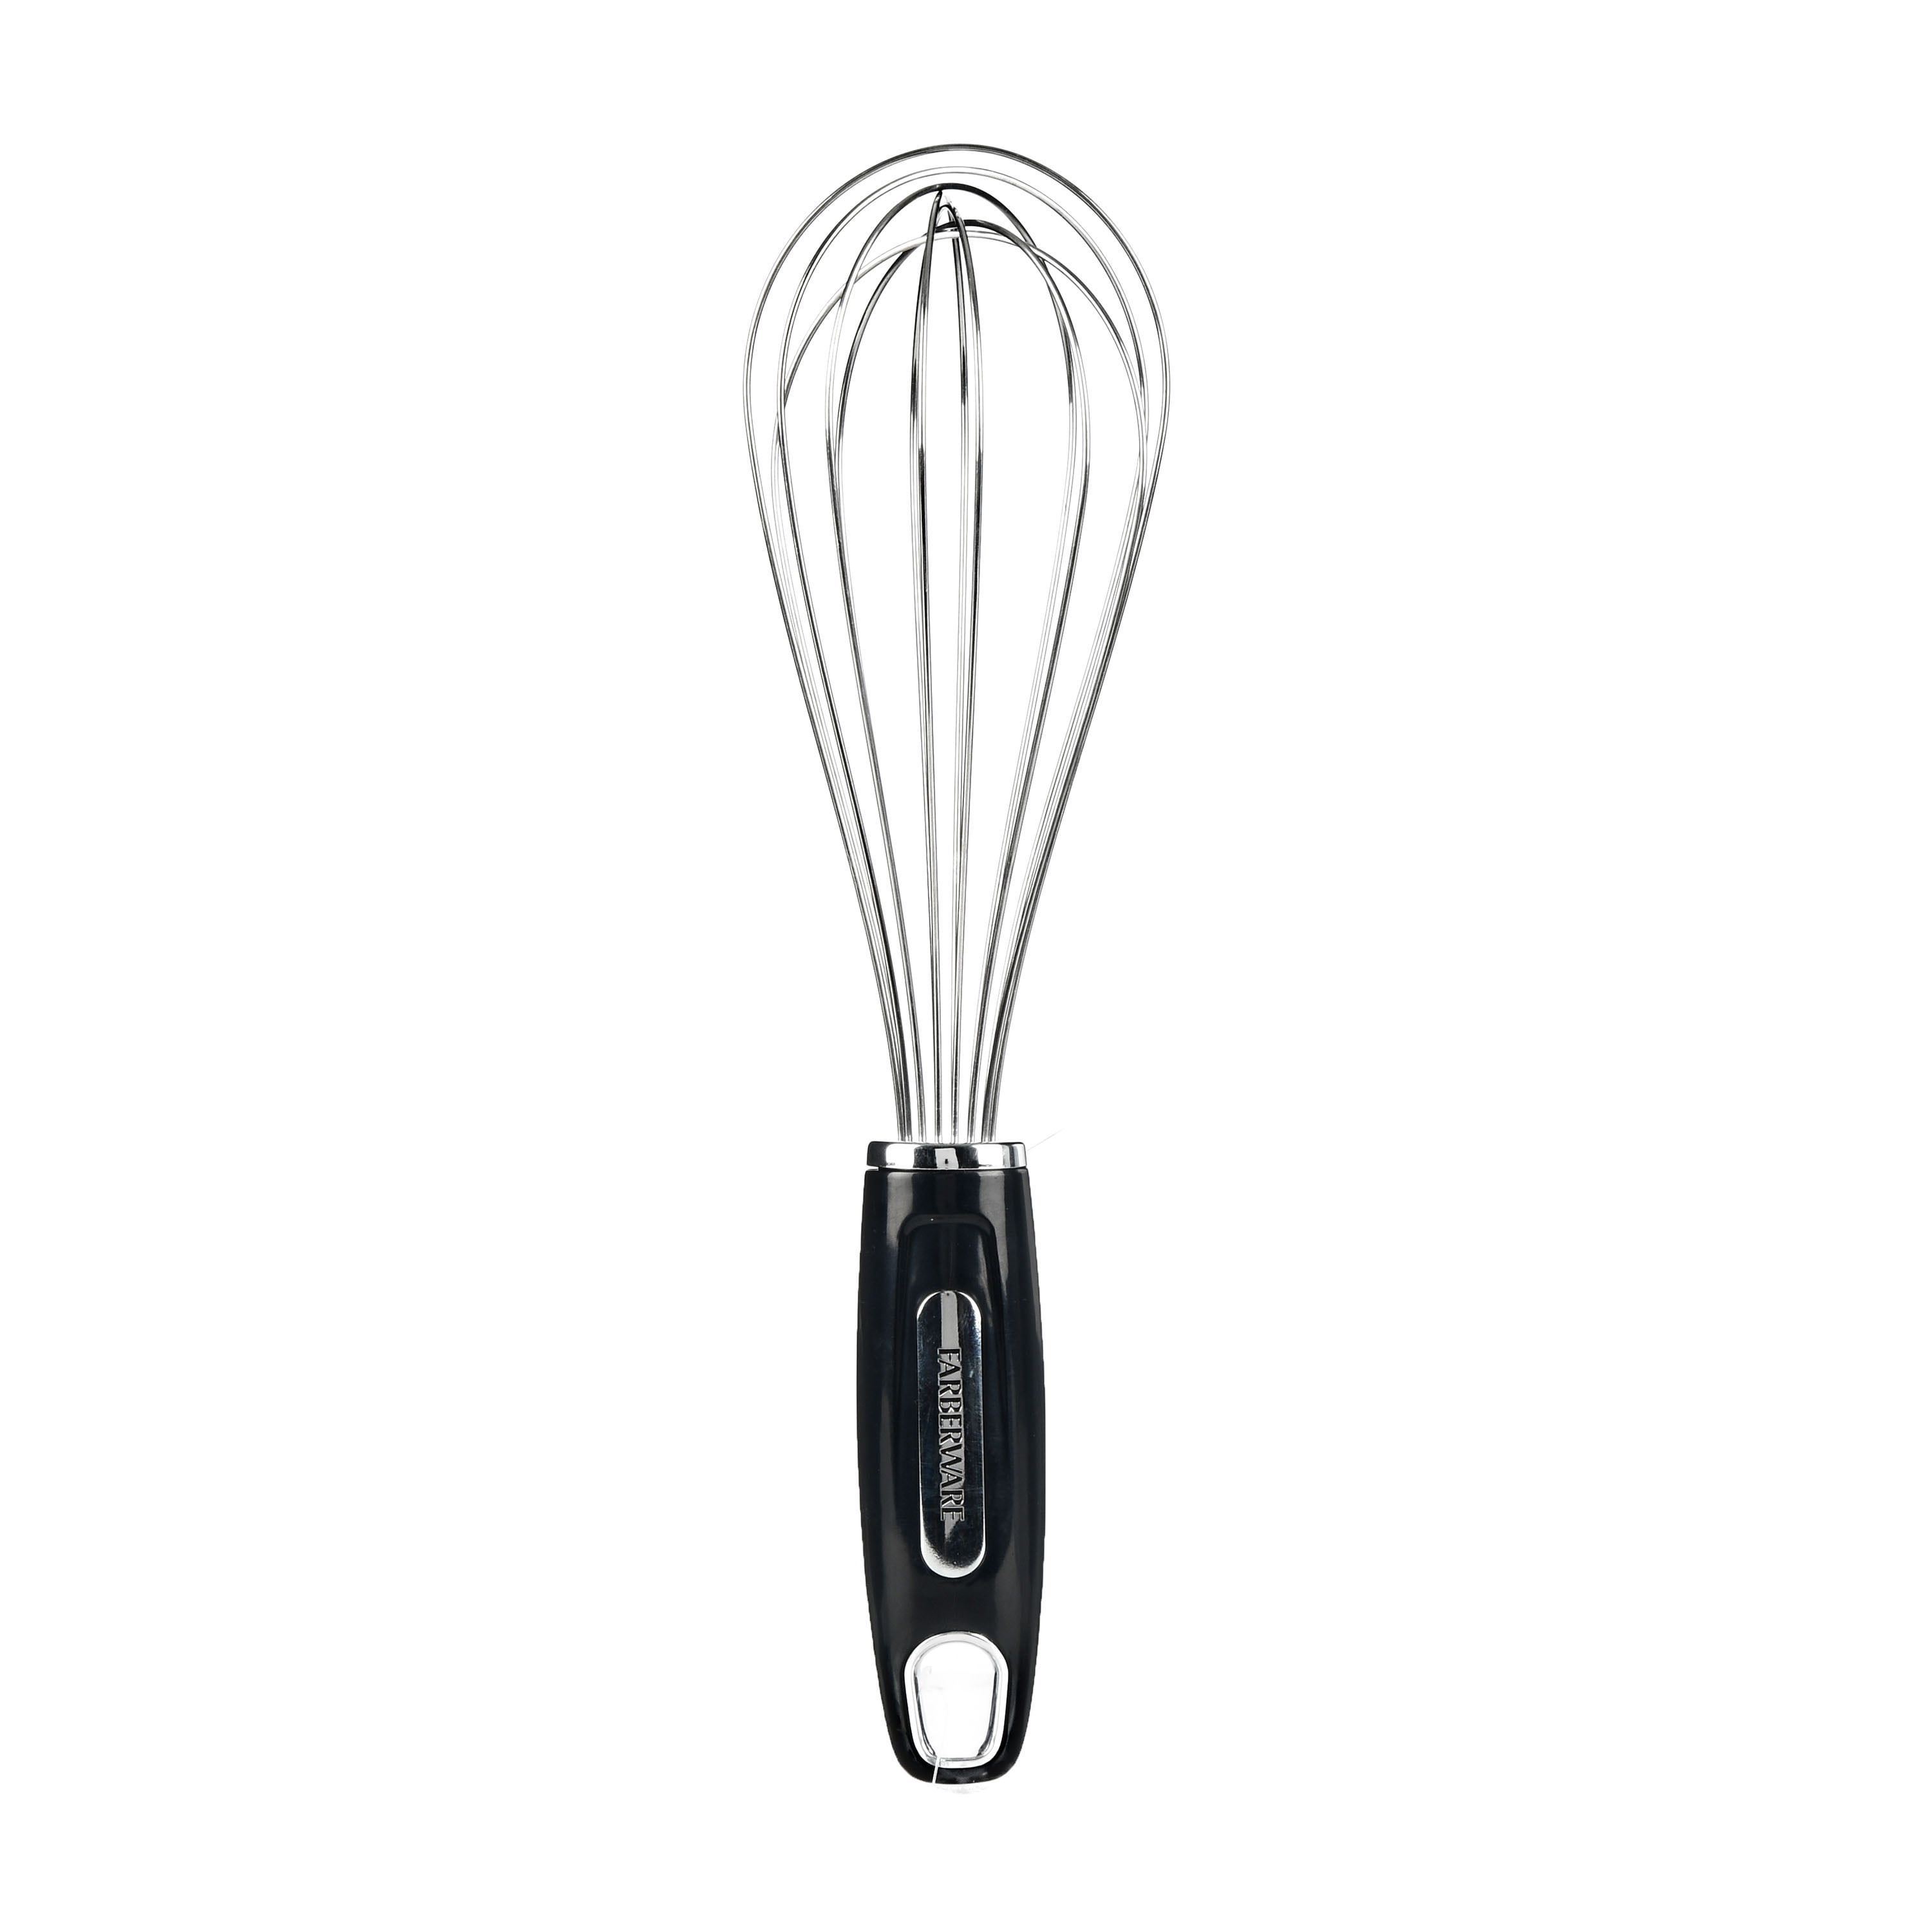 14 Inch Stainless Steel Hand Whisk - Durable & Easy to Use Push-Down Zip  Whisker - Rotary Hand Mixer for Beating Eggs, Frothing Milk, Blending